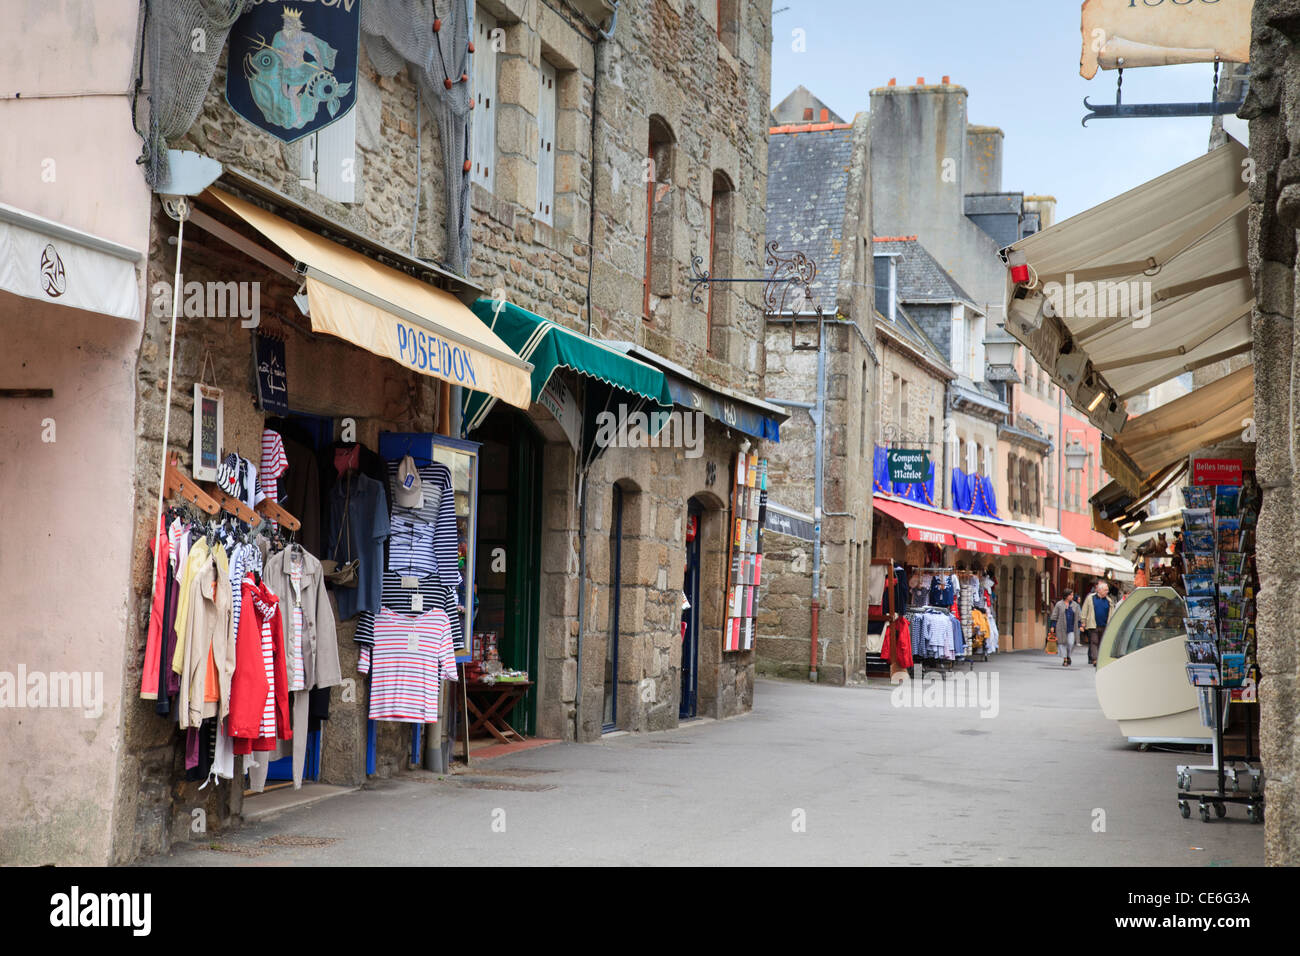 Souvenir shops selling striped Breton clothing in the Ville Close at Concarneau, Brittany, France. Stock Photo